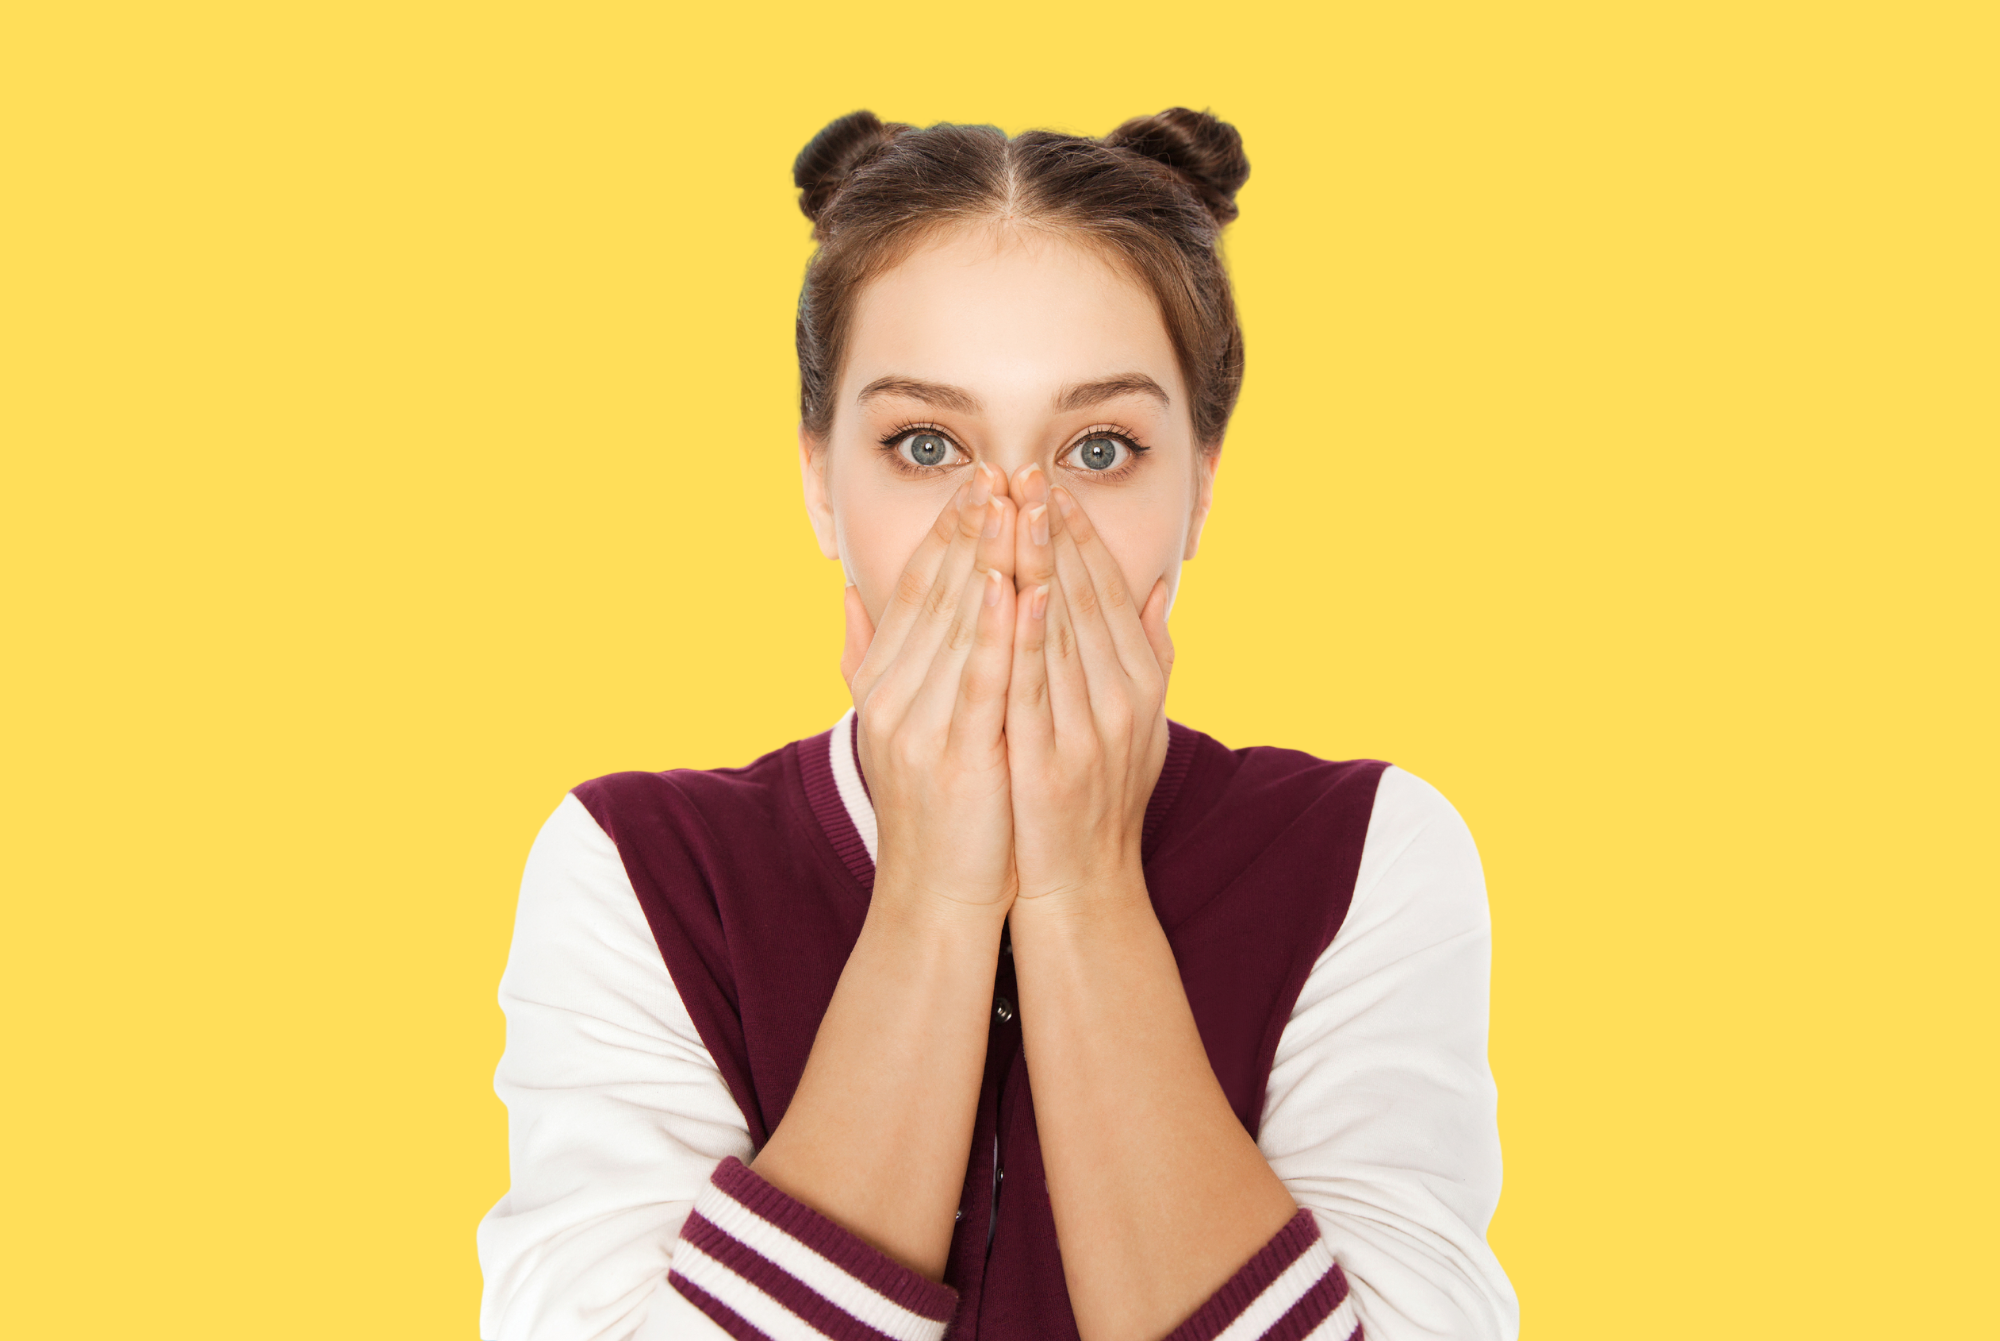 A tween or teen girl looks embarrassed as she stares straight into the camera with her hands over her mouth.